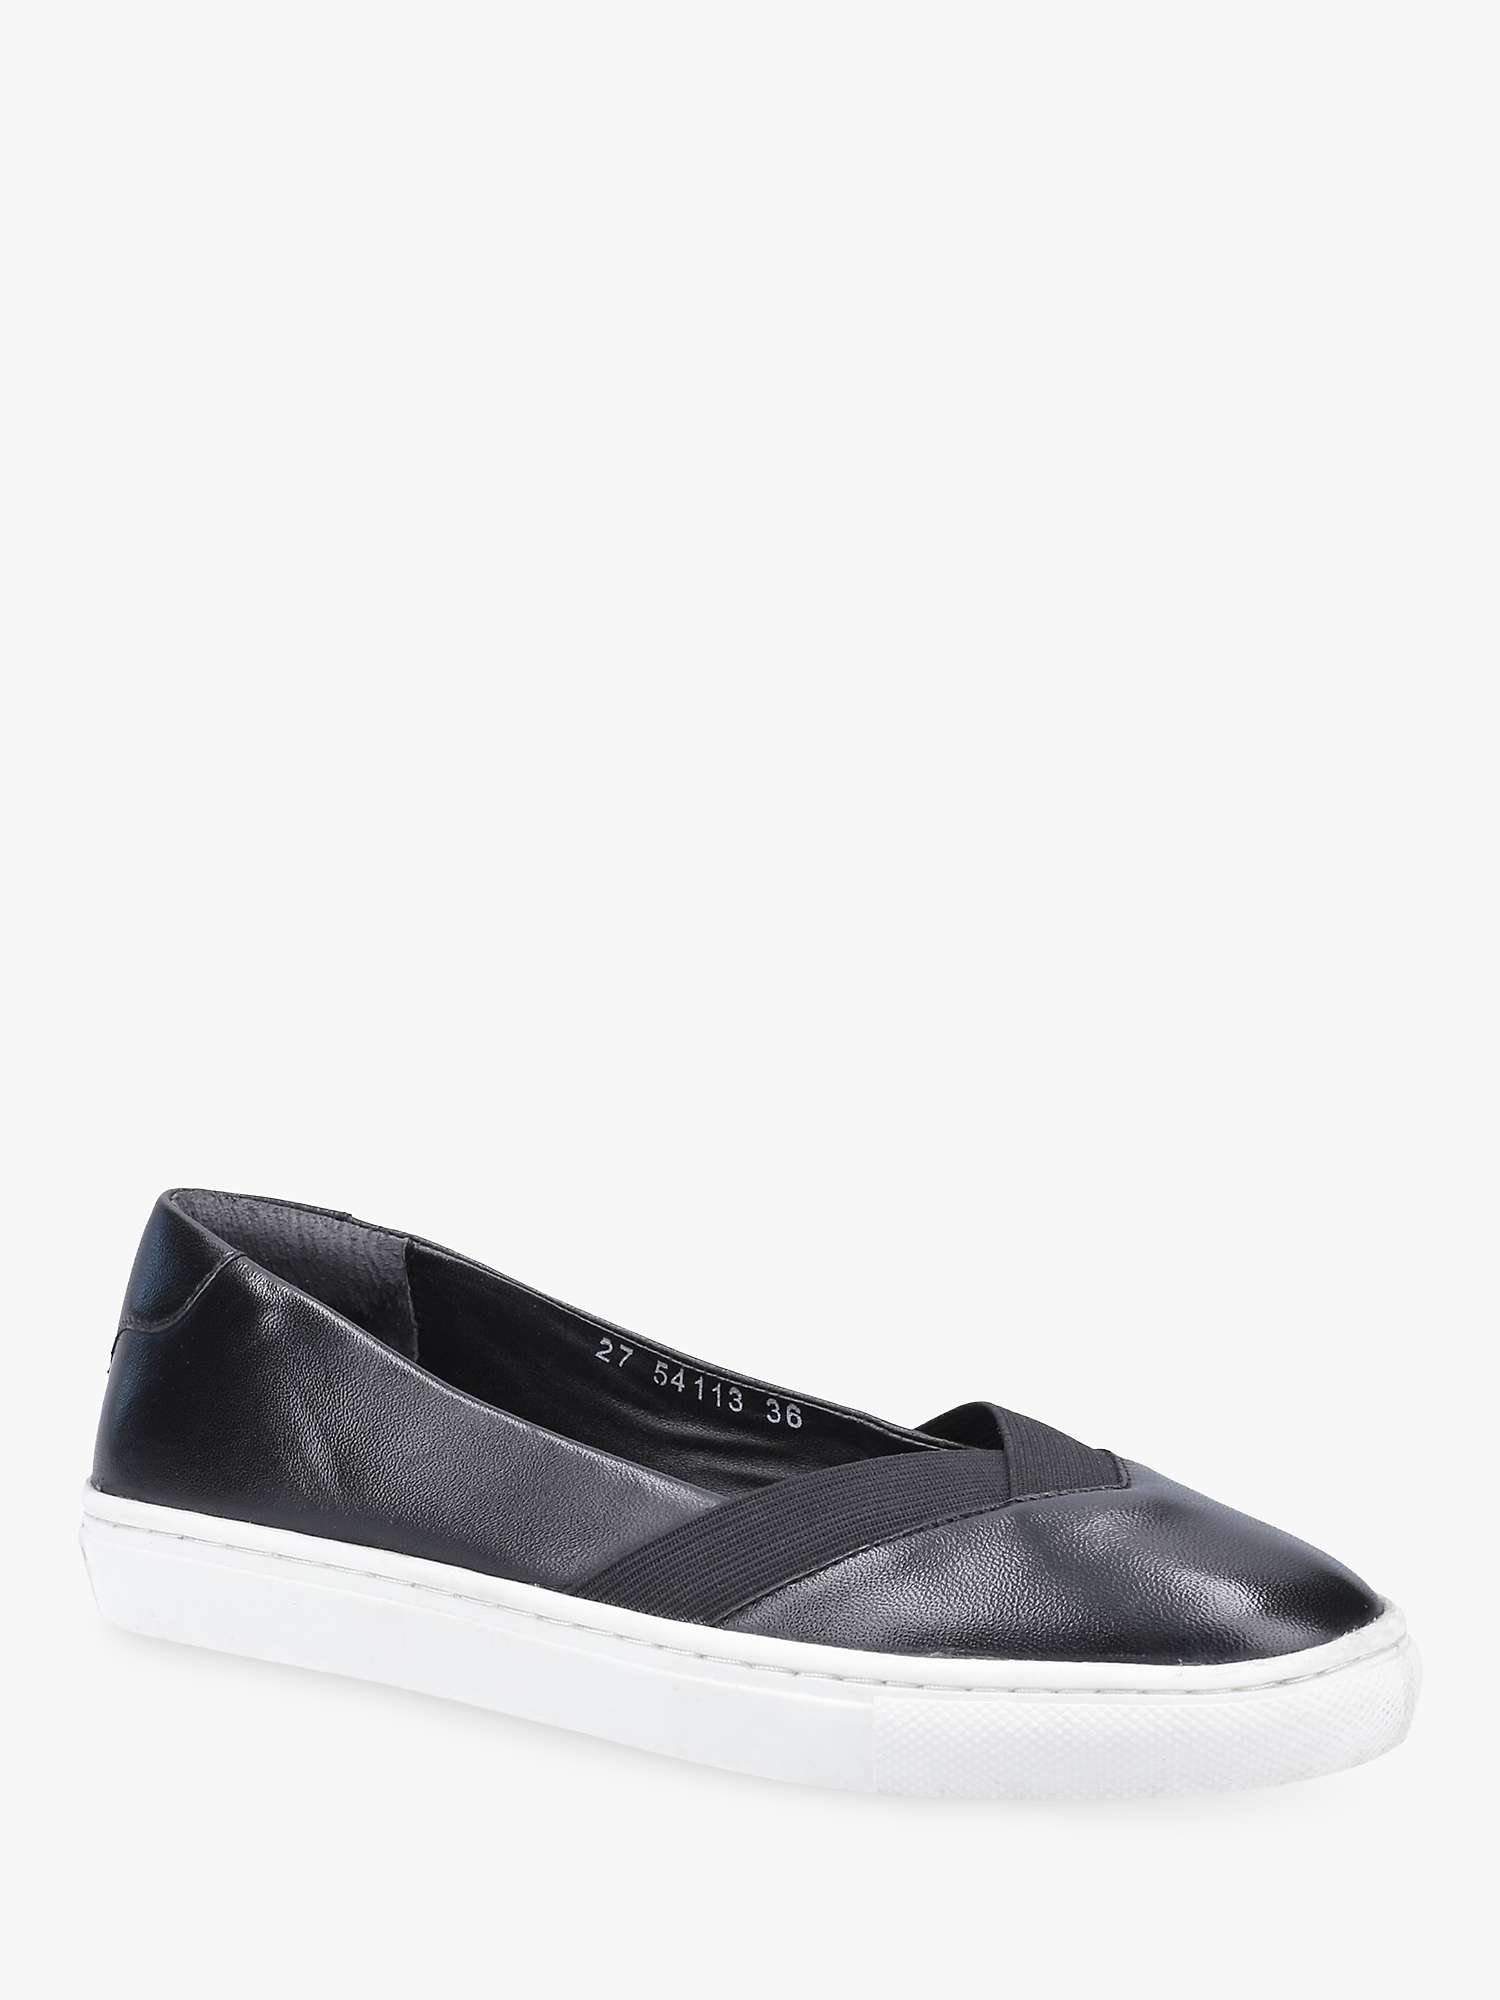 Buy Hush Puppies Tiffany Leather Slip On Pumps, Black Online at johnlewis.com